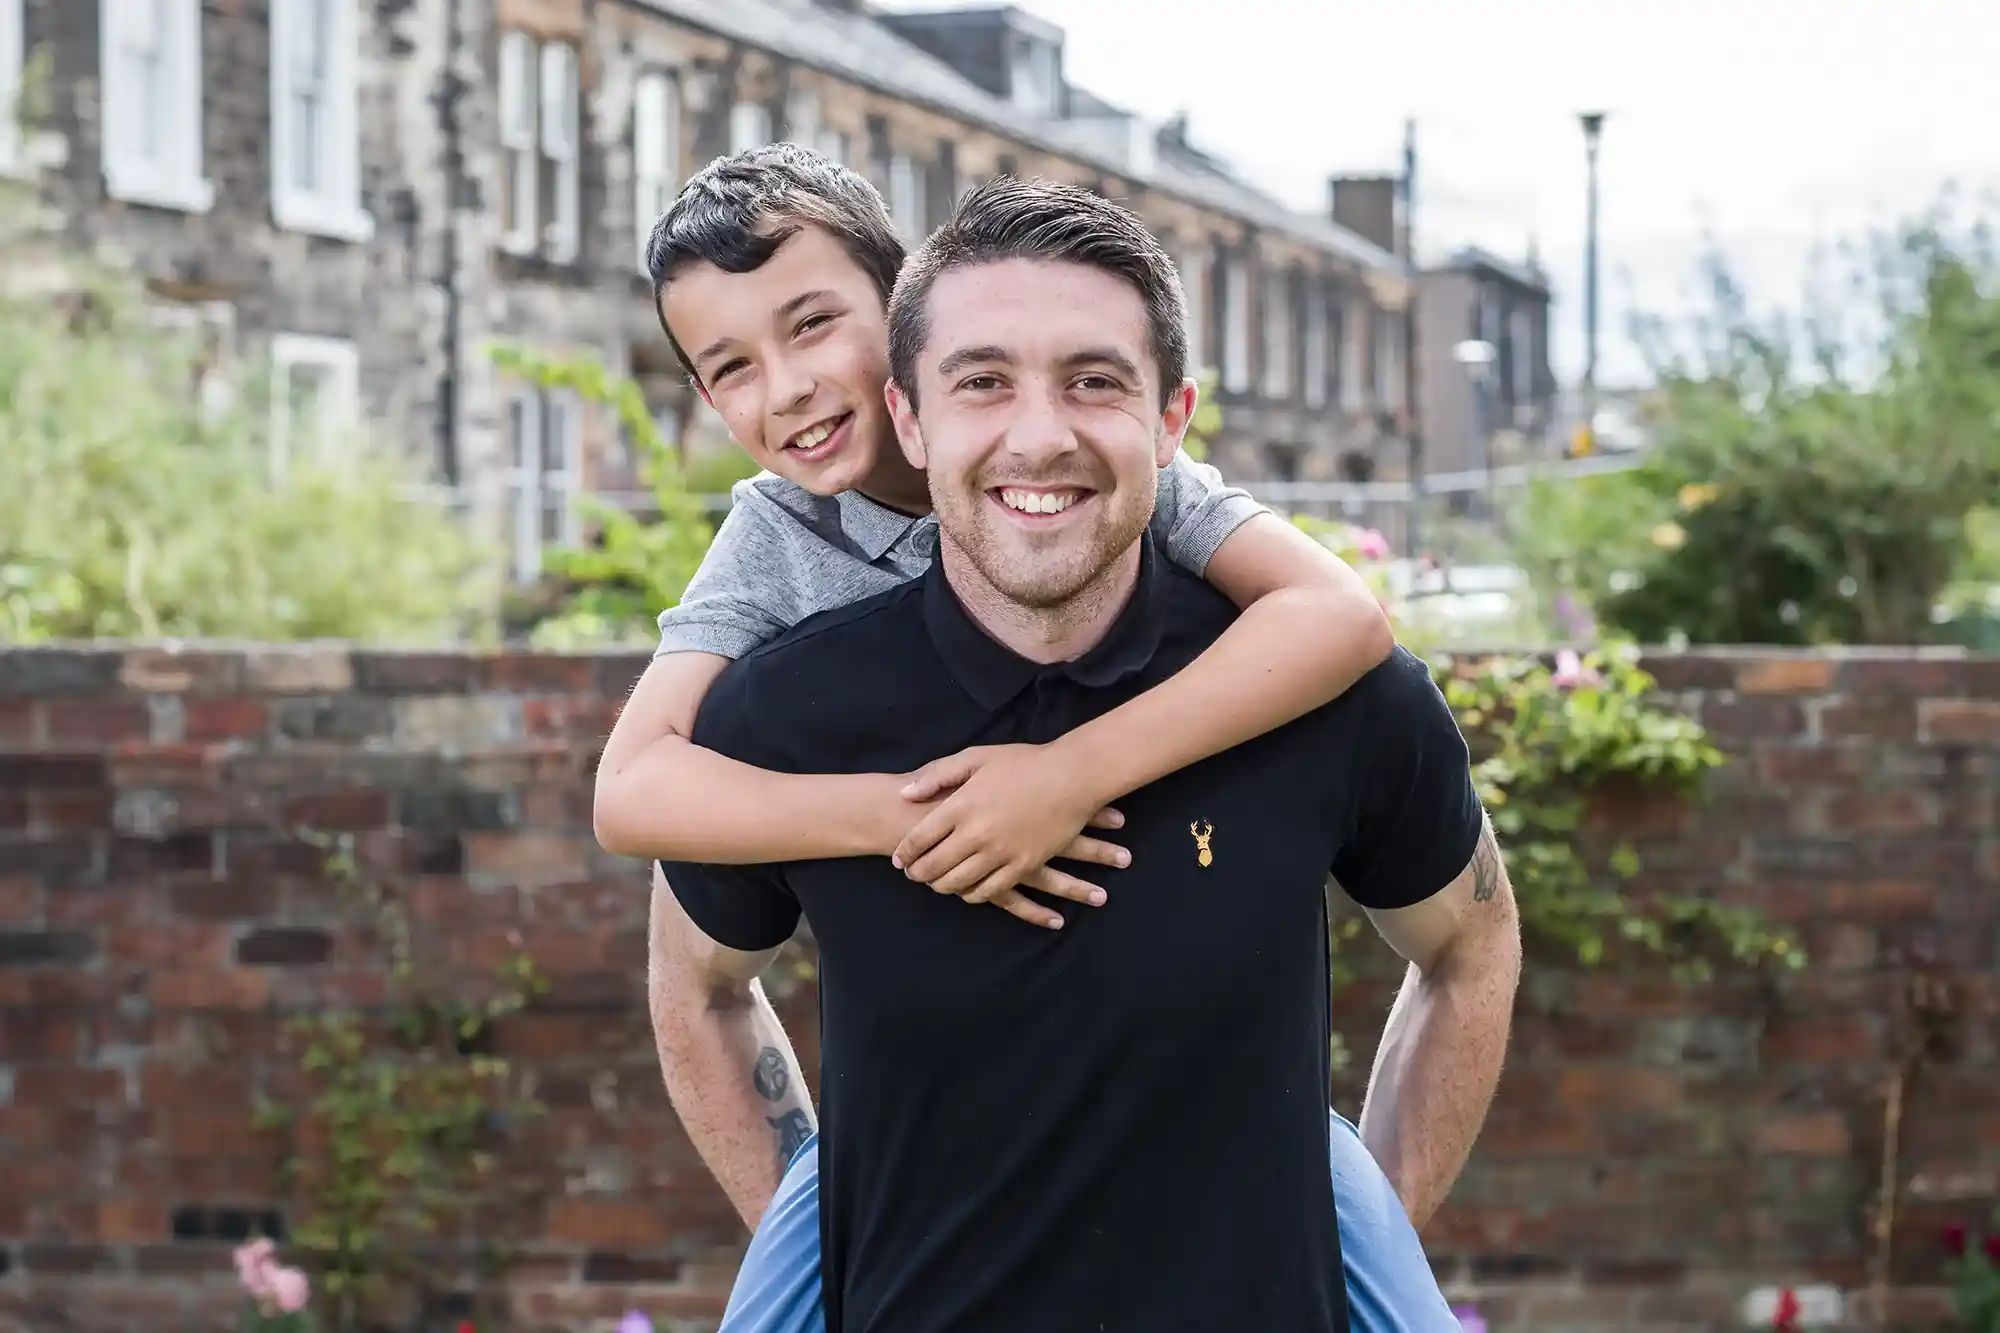 A man with short dark hair smiles as he gives a piggyback ride to a young boy with short hair. They are outdoors, with a brick wall and houses in the background.